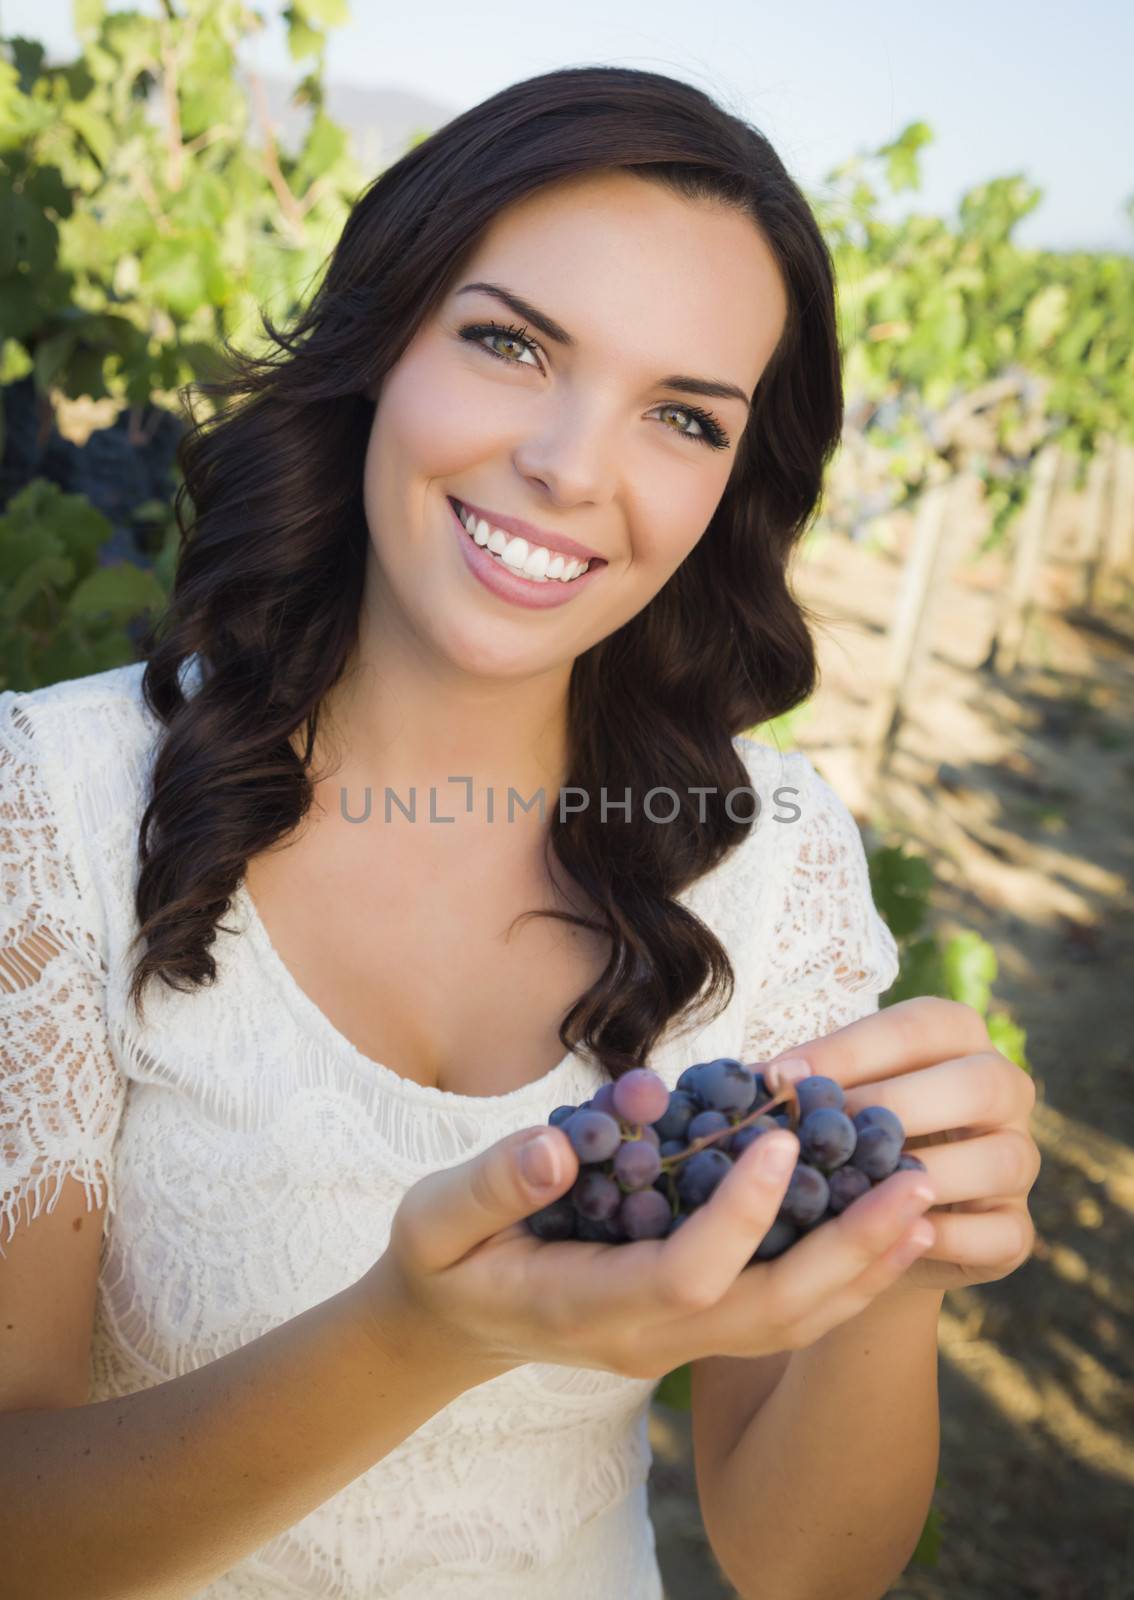 Young Adult Woman Enjoying The Wine Grapes in The Vineyard by Feverpitched